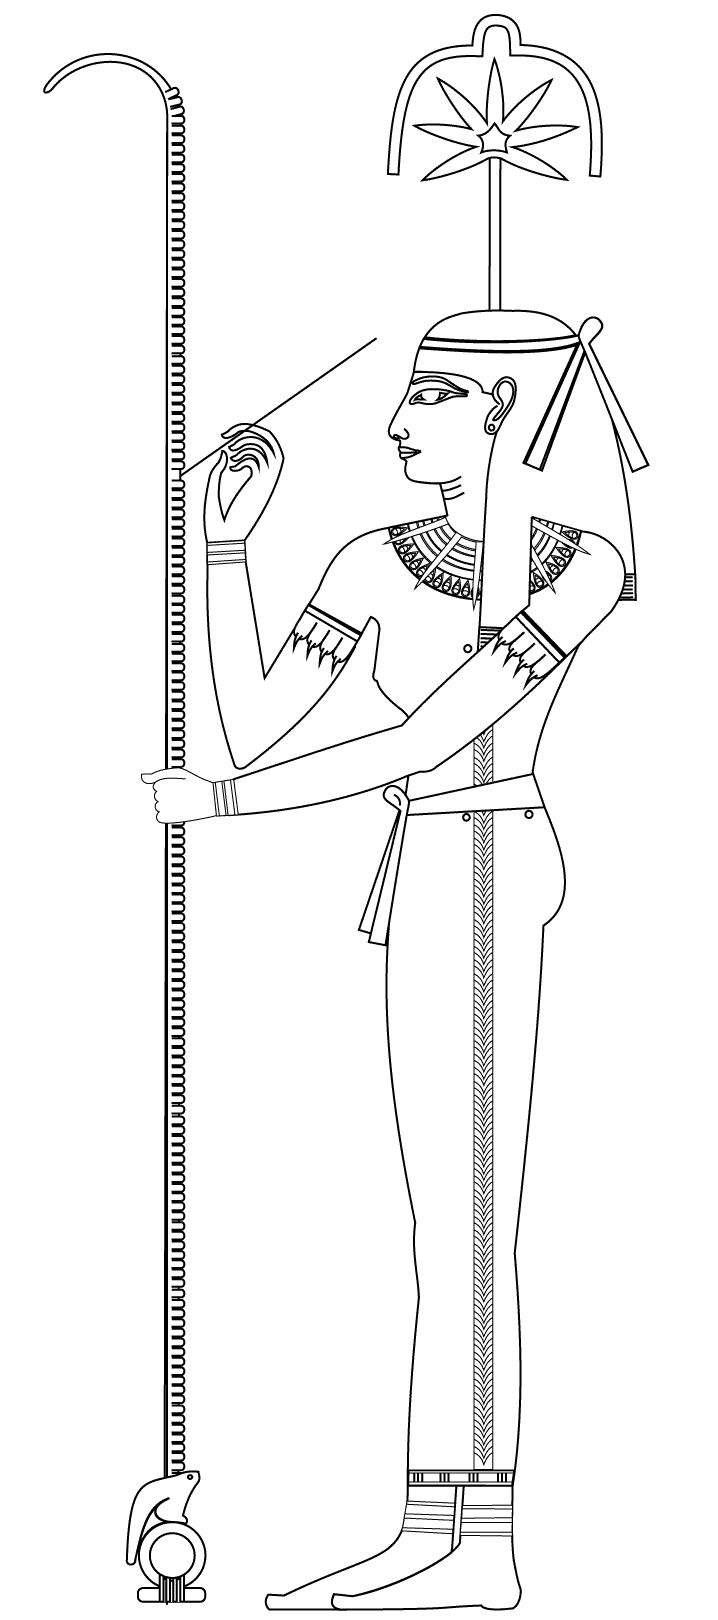 Seshat-goddess-of-writing-and-wisdom - Egypt Kids Coloring Pages